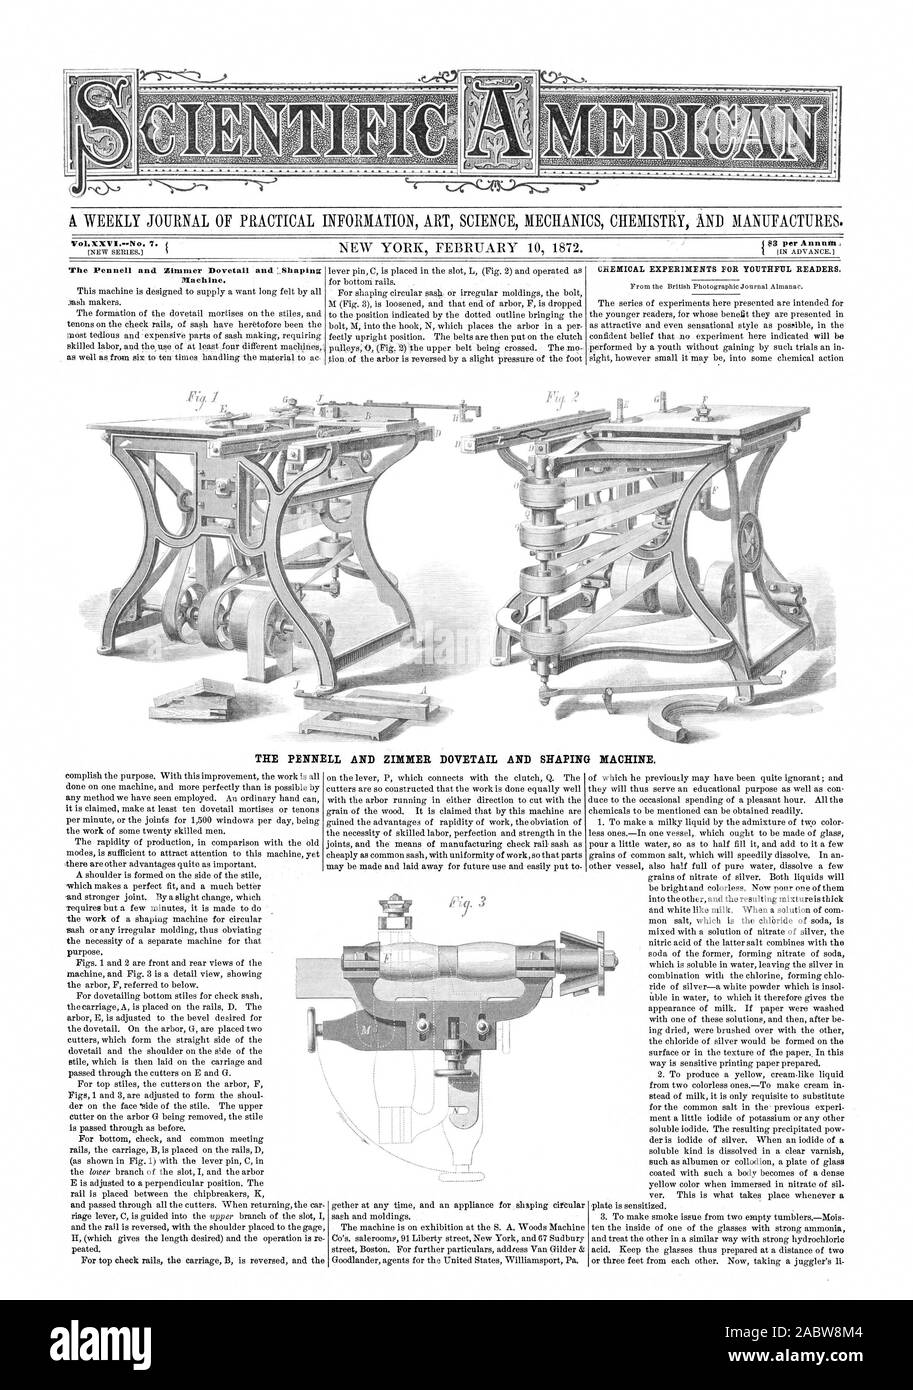 A WEEKLY JOURNAL OF PRACTICAL INFORMATION ART SCIENCE MECHANICS CHEMISTRY AND MANUFACTURES. Nrol.NXVI.-No. 7. The Pennell and Zimmer Dovetail and : Shaping Machine. THE PENNELL AND ZIMMER DOVETAIL AND SHAPING MACHINE., scientific american, 1872-02-10 Stock Photo